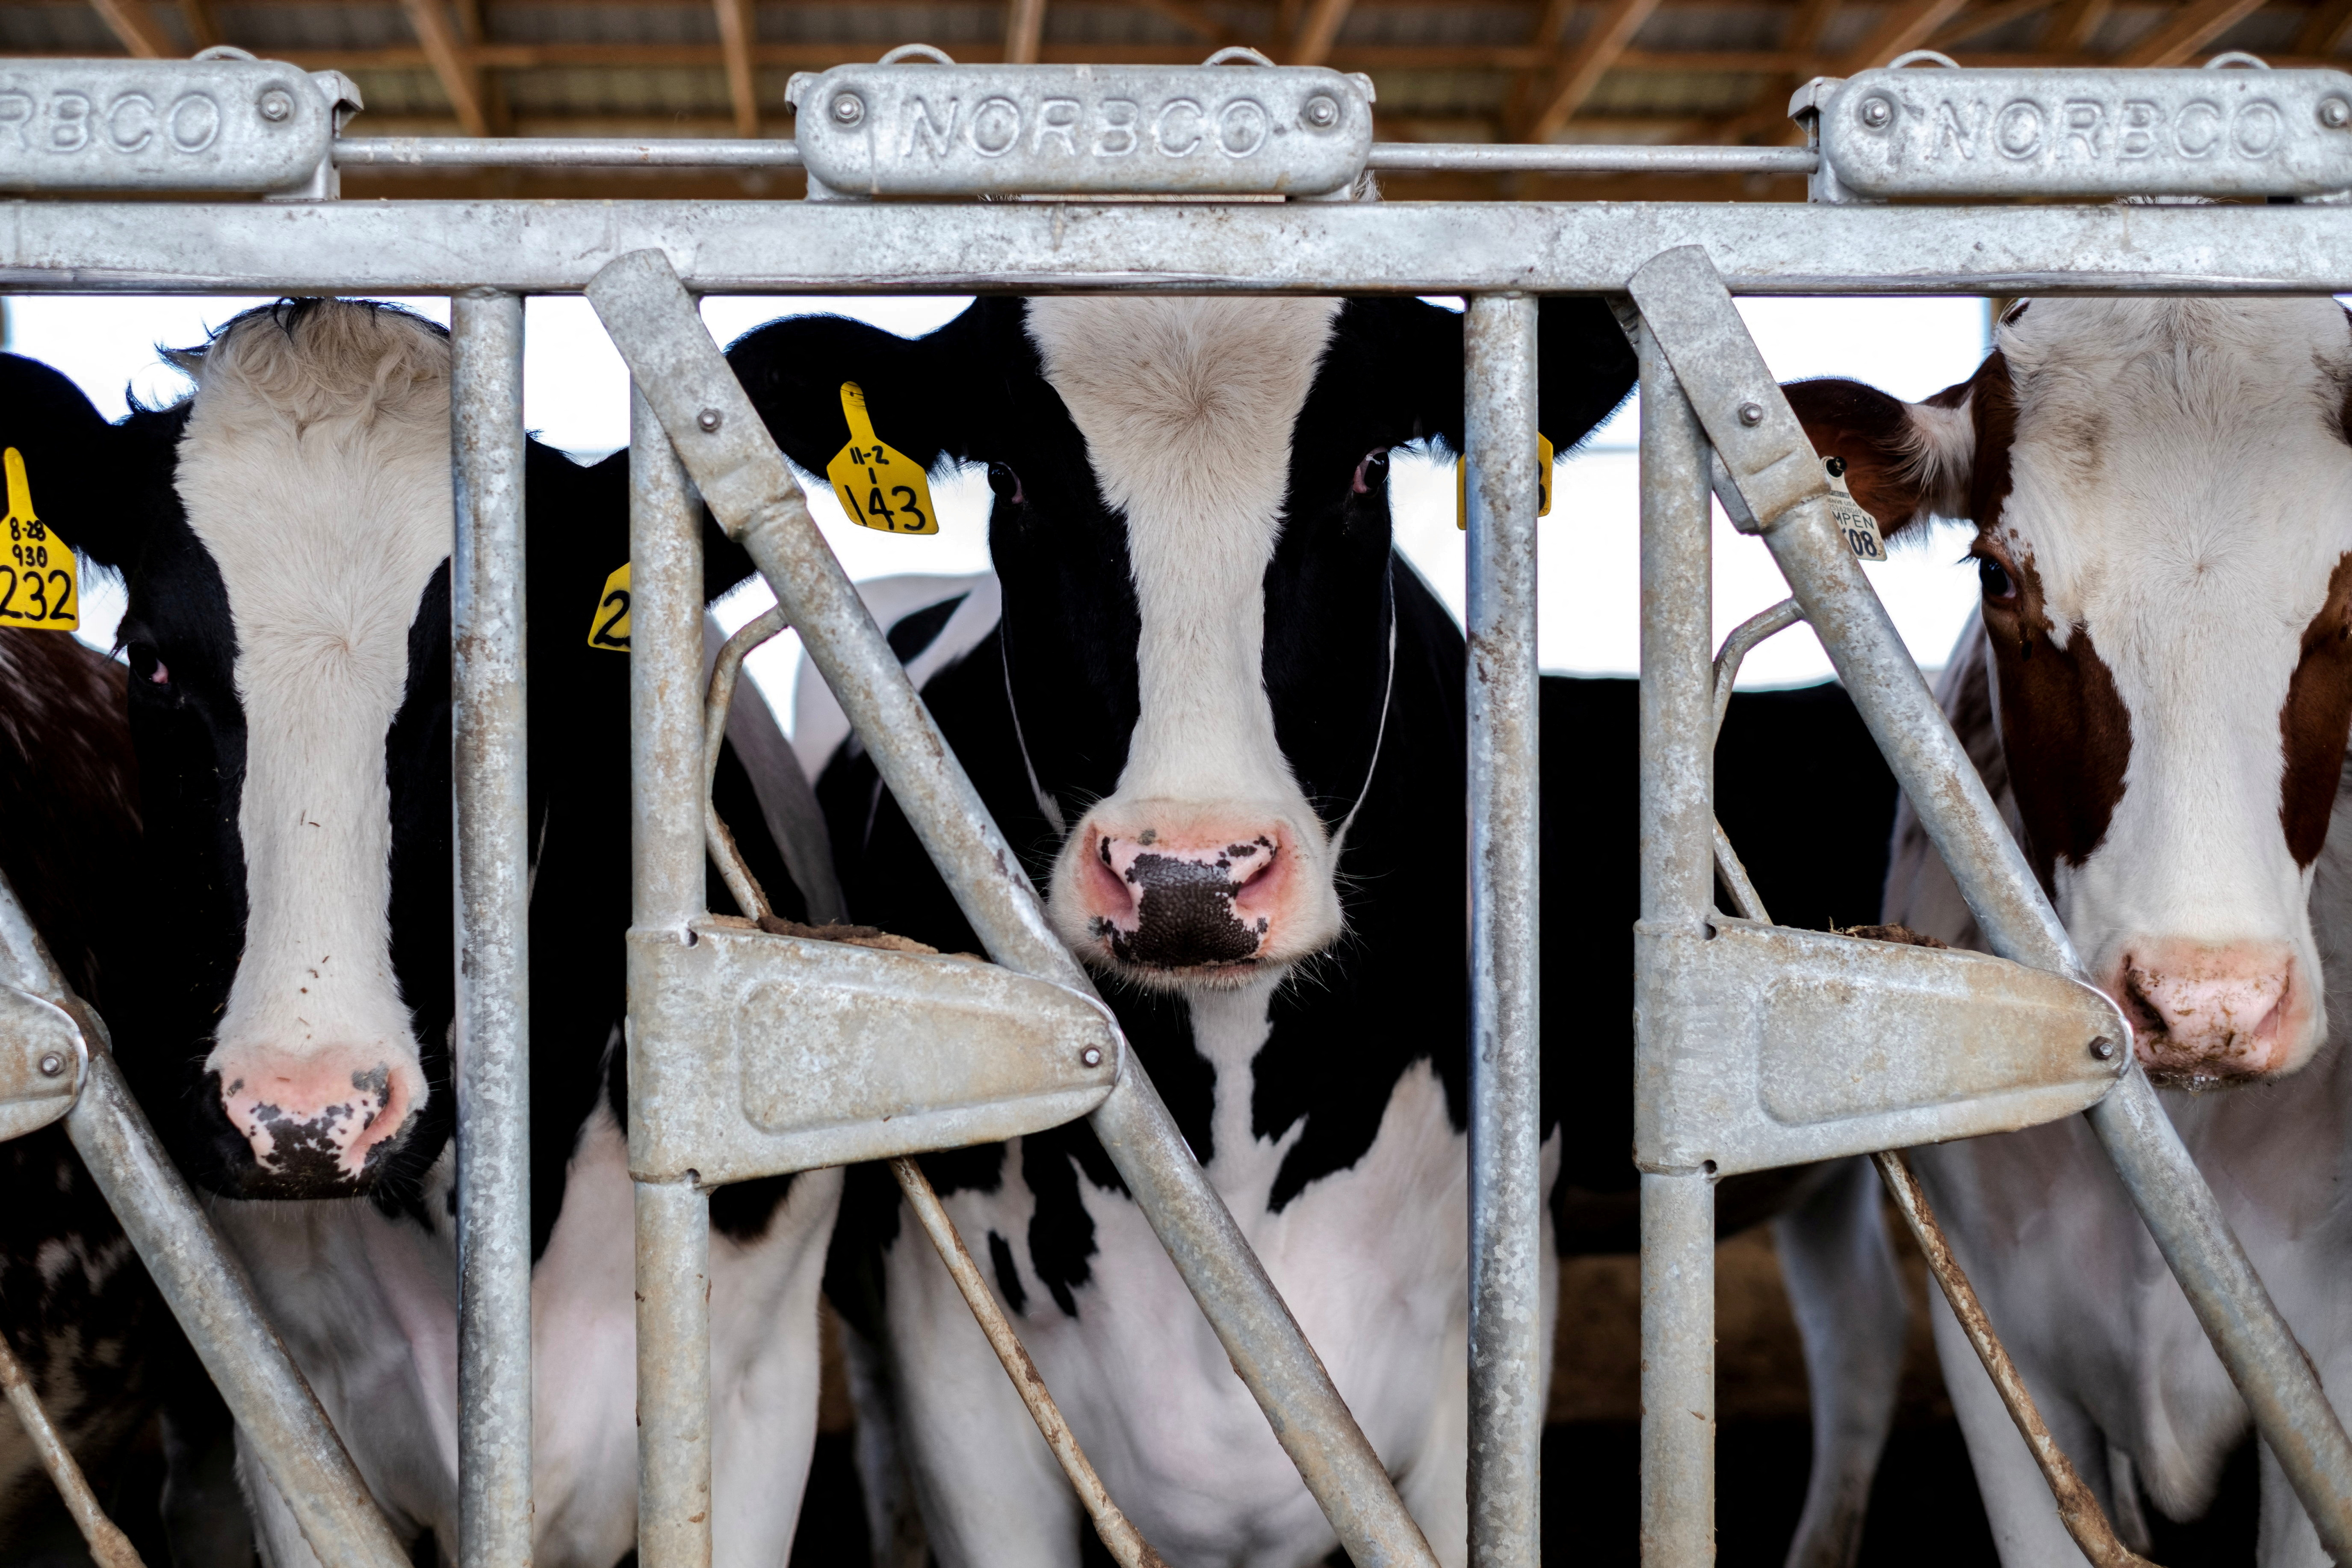 Cows stand in their pen at a cattle farm in Rockford